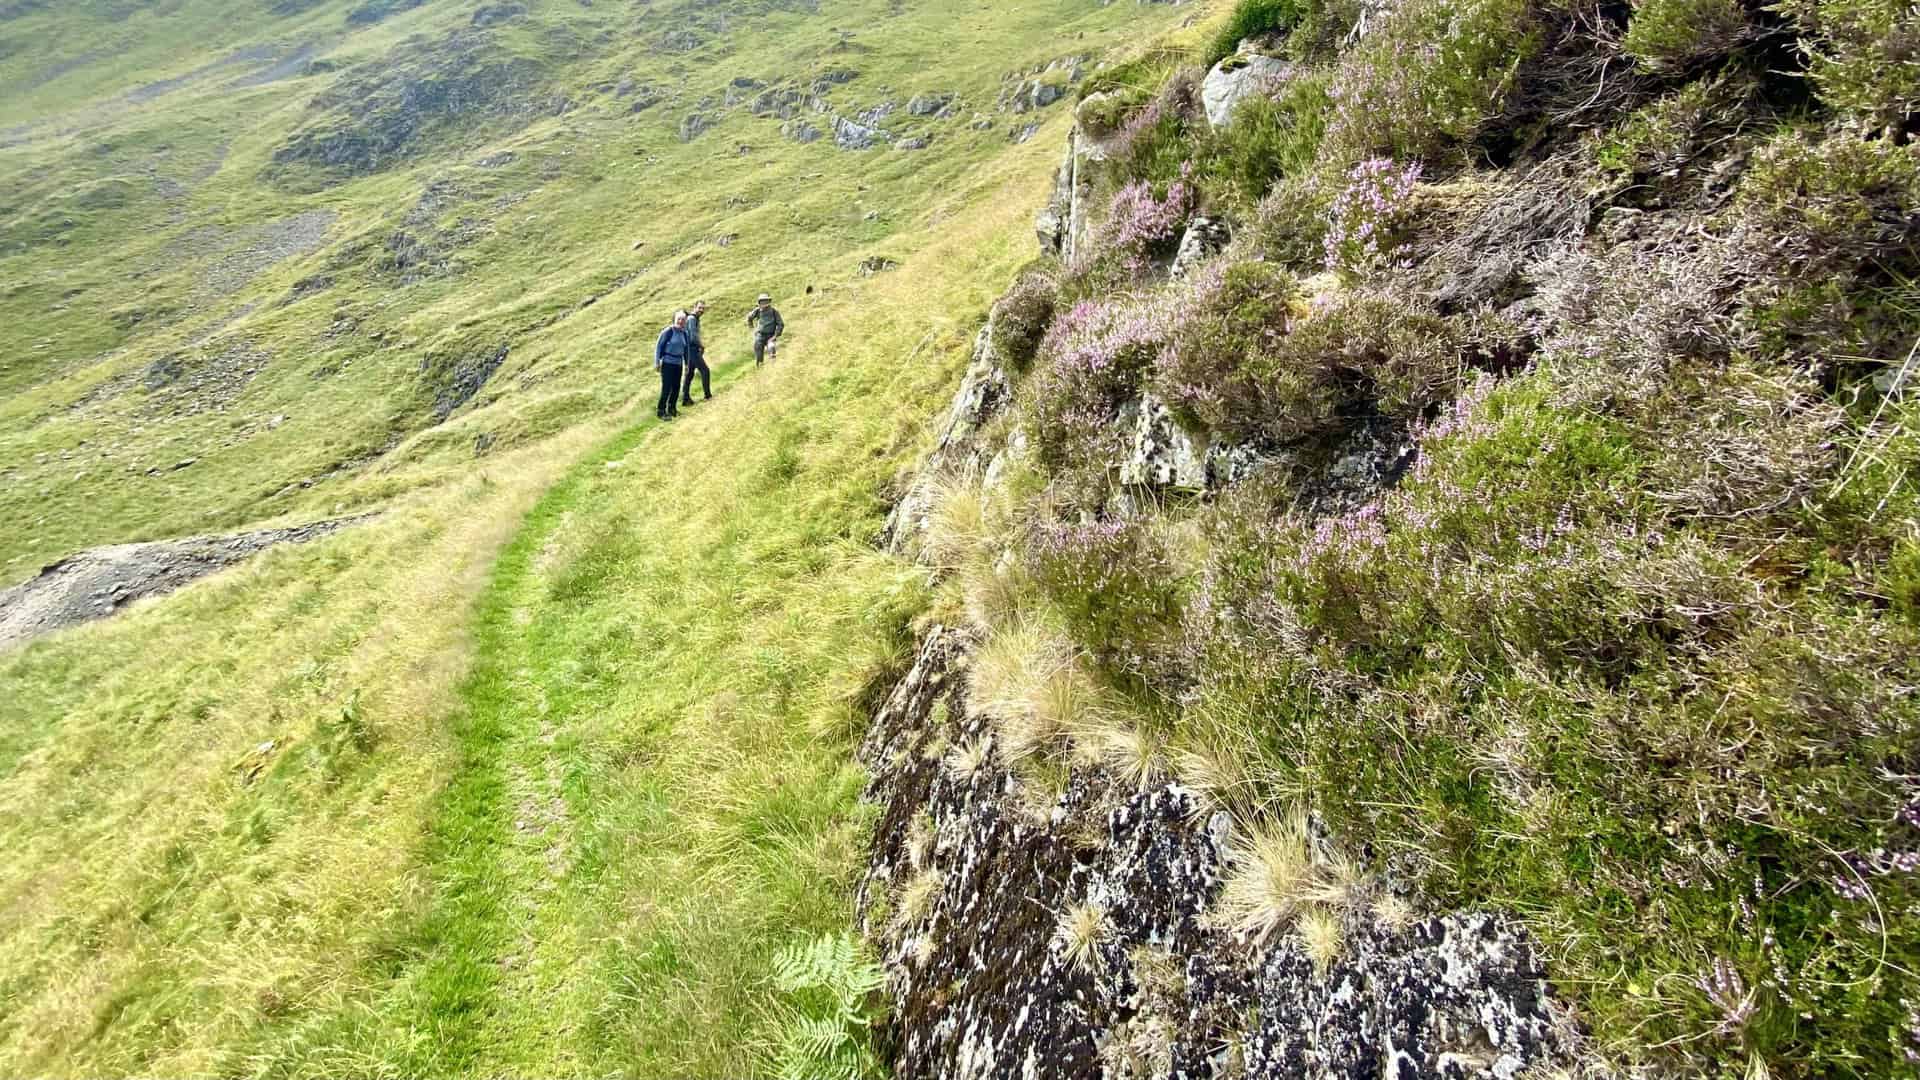 The footpath below Glencoyne Head is comfortable to walk along and easy to navigate.